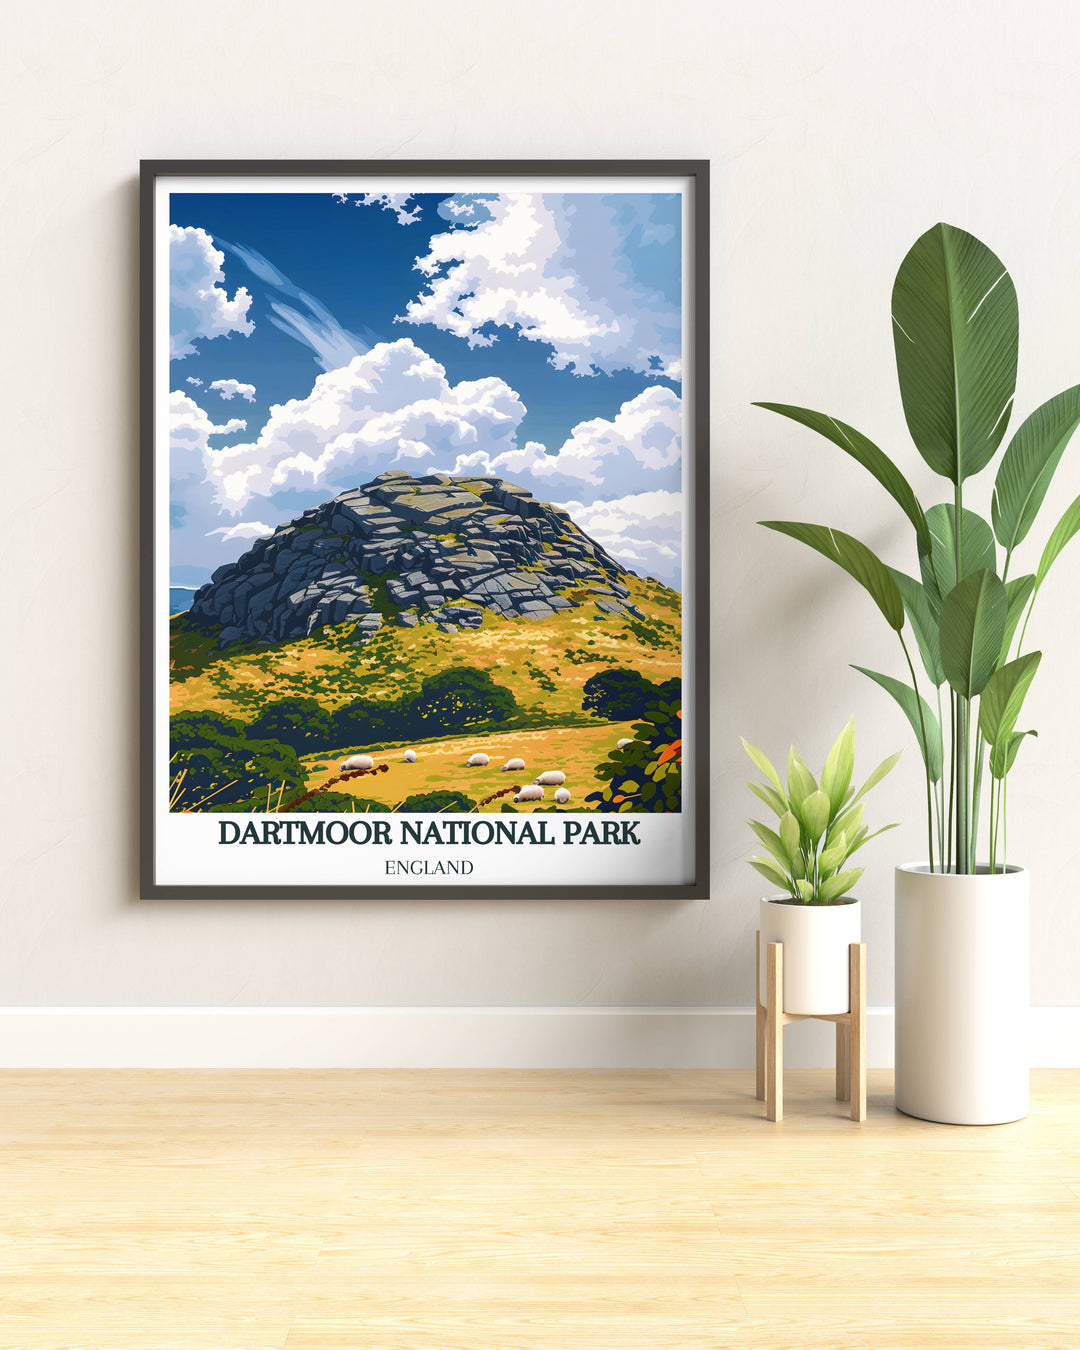 Unique Dartmoor gift items, including bespoke wall hangings and decor, showcasing the natural beauty and heritage of Dartmoor, perfect for nature lovers and outdoor enthusiasts.